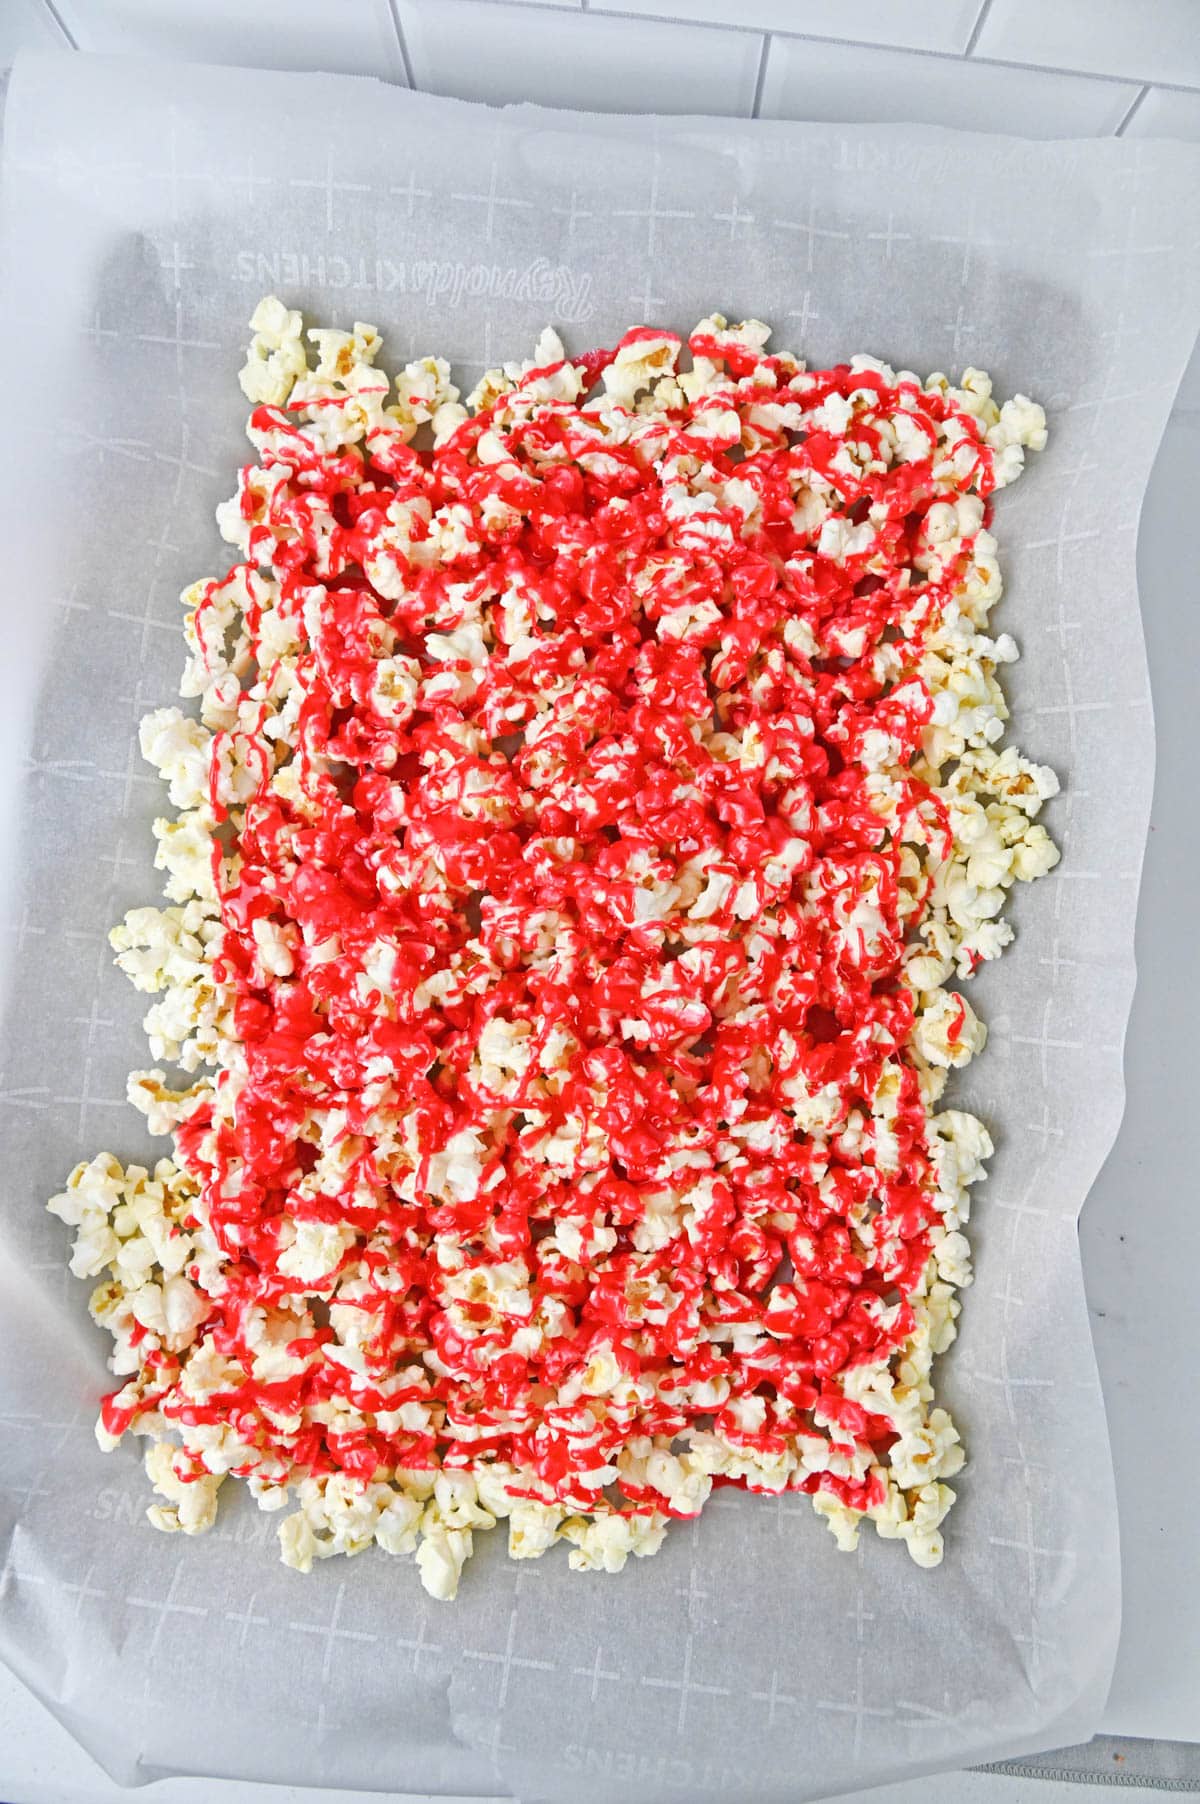 Popcorn with Jello drizzled over it